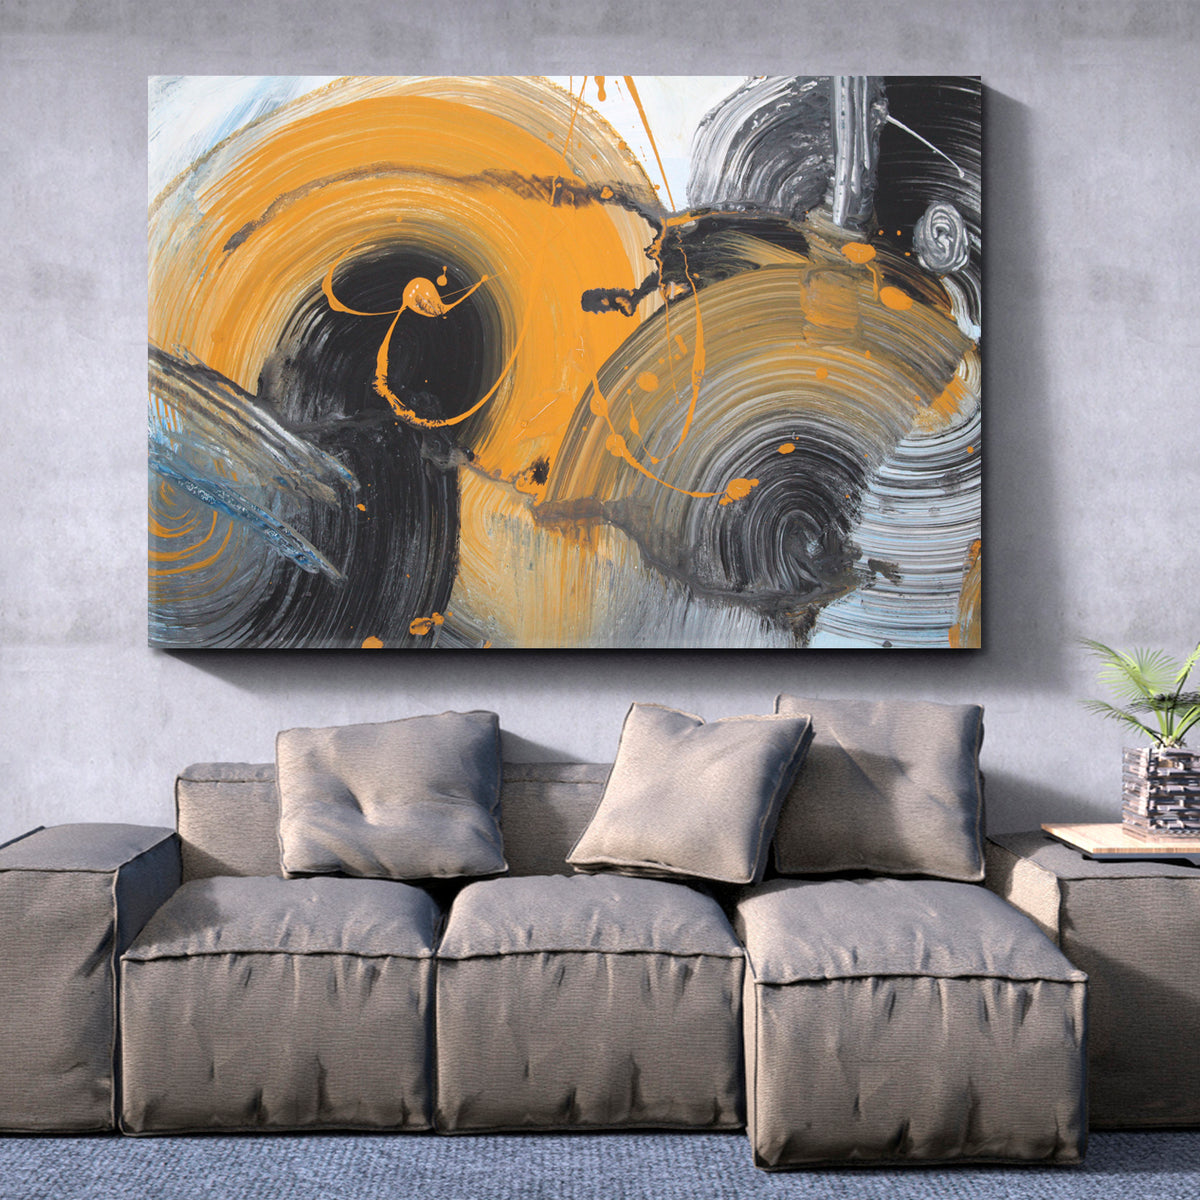 Black Grey White Yellow Colors Brushstrokes Abstract Trendy Style Contemporary Art Artesty 1 panel 24" x 16" 